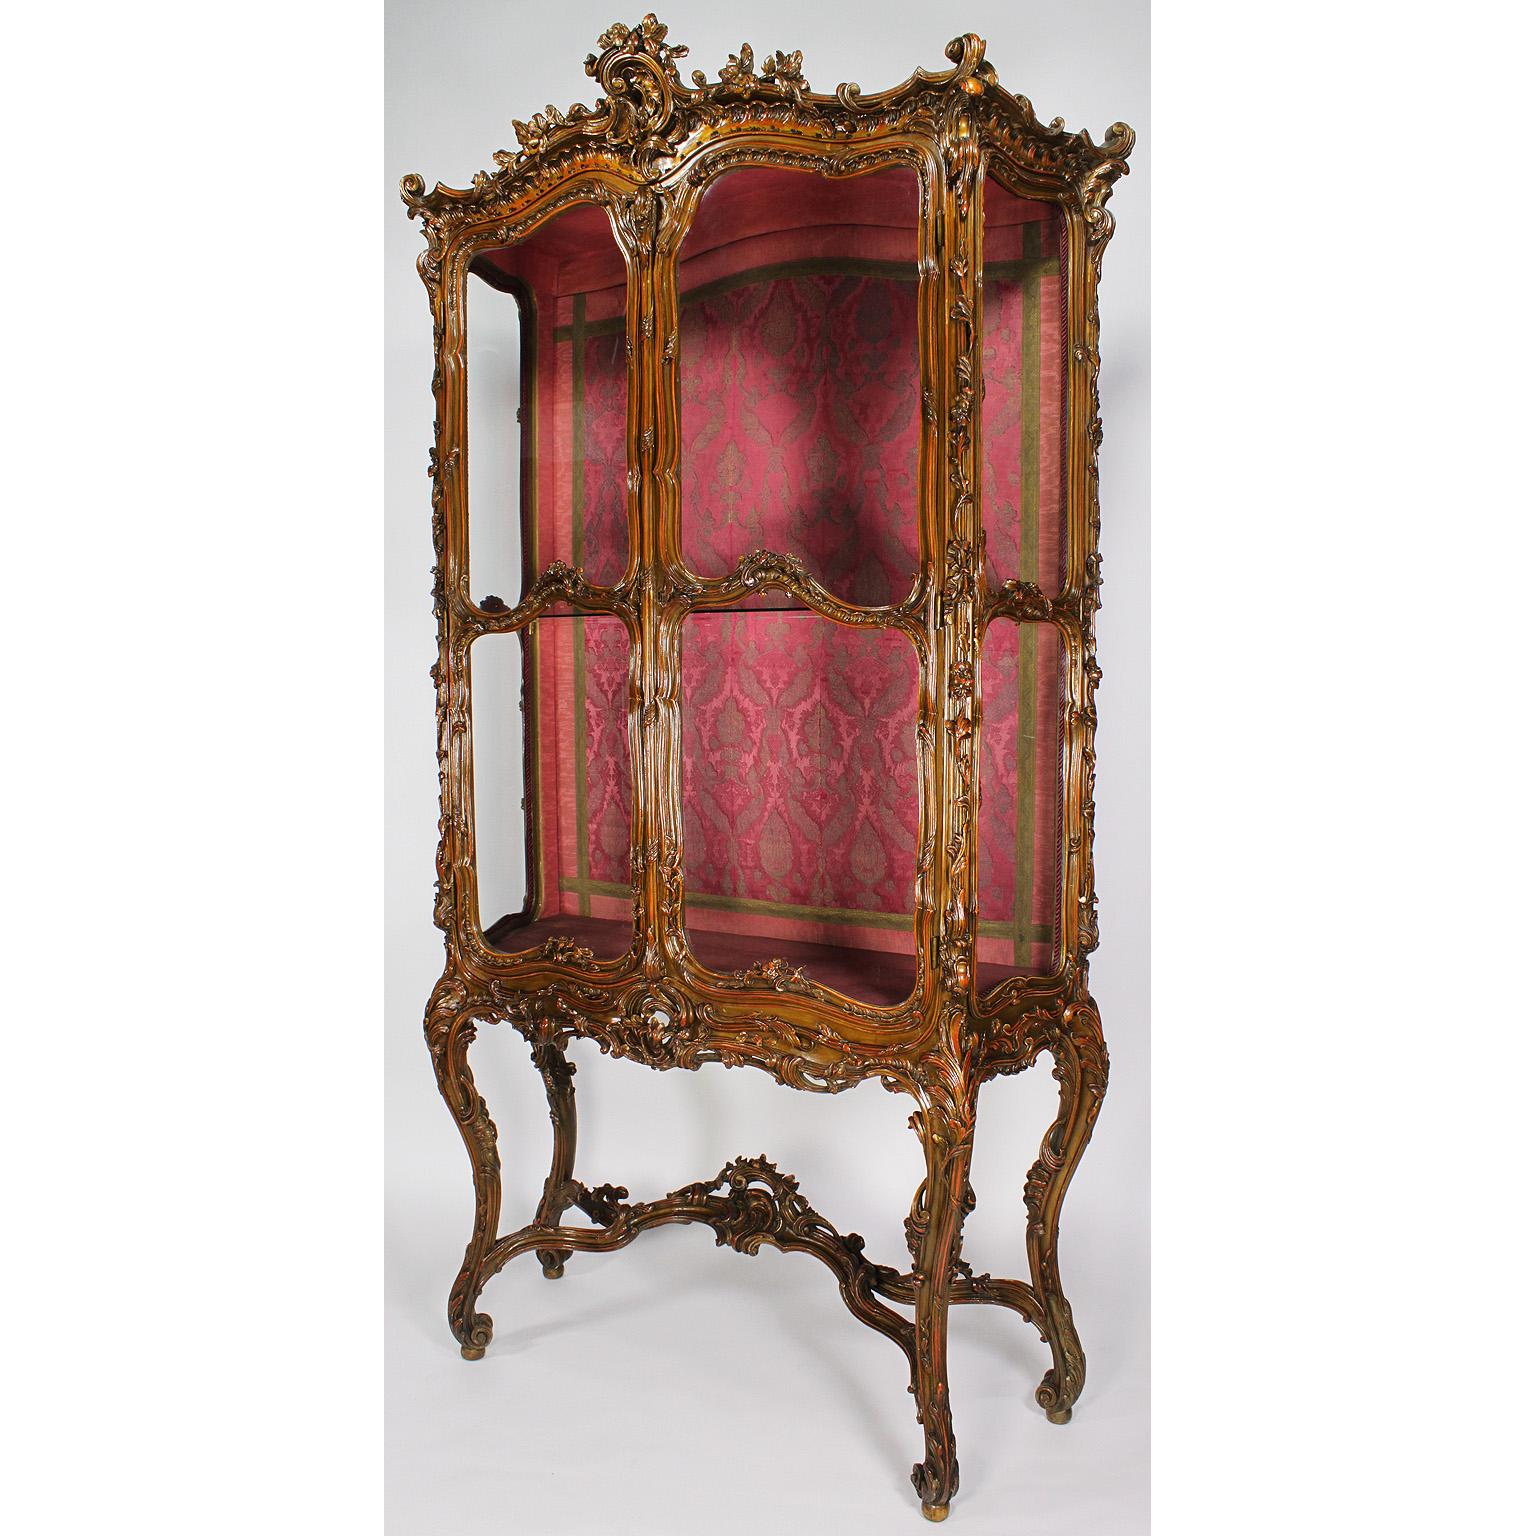 A very fine and palatial French 19th century Louis XV style giltwood ornately carved two-door vitrine display cabinet of serpentine form with foliate and shell carvings, surrounding two glazed bombé front doors, circa: Paris, 1870-1880.

Measures: